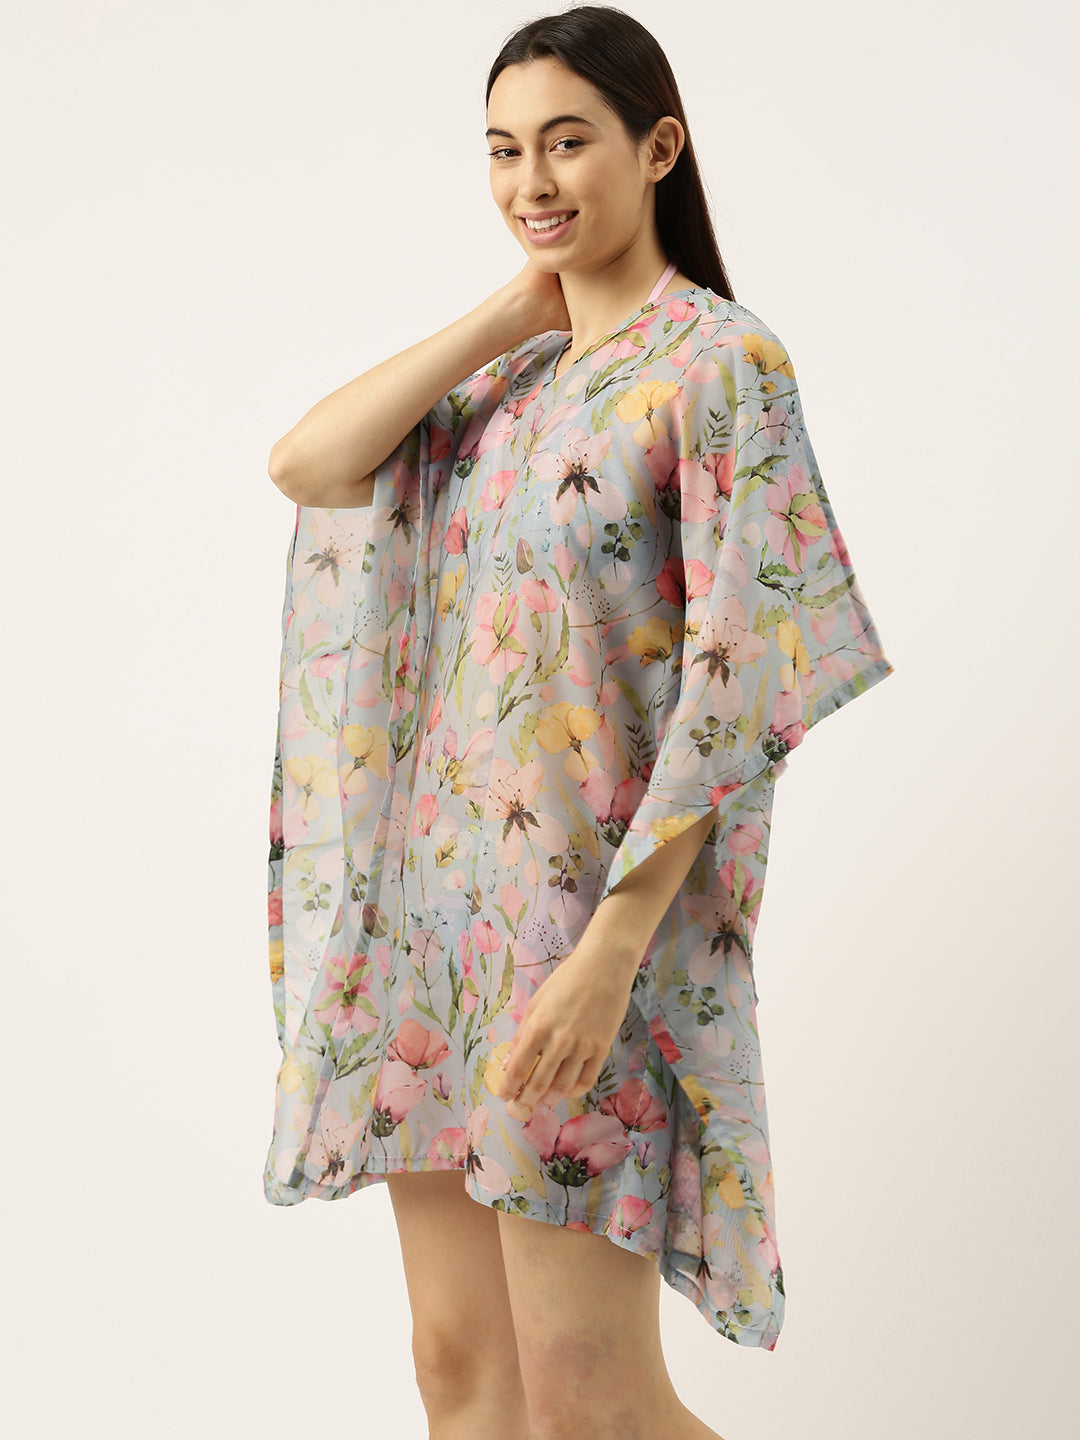 S85 Women Printed Beach Cover Up - Clt.s